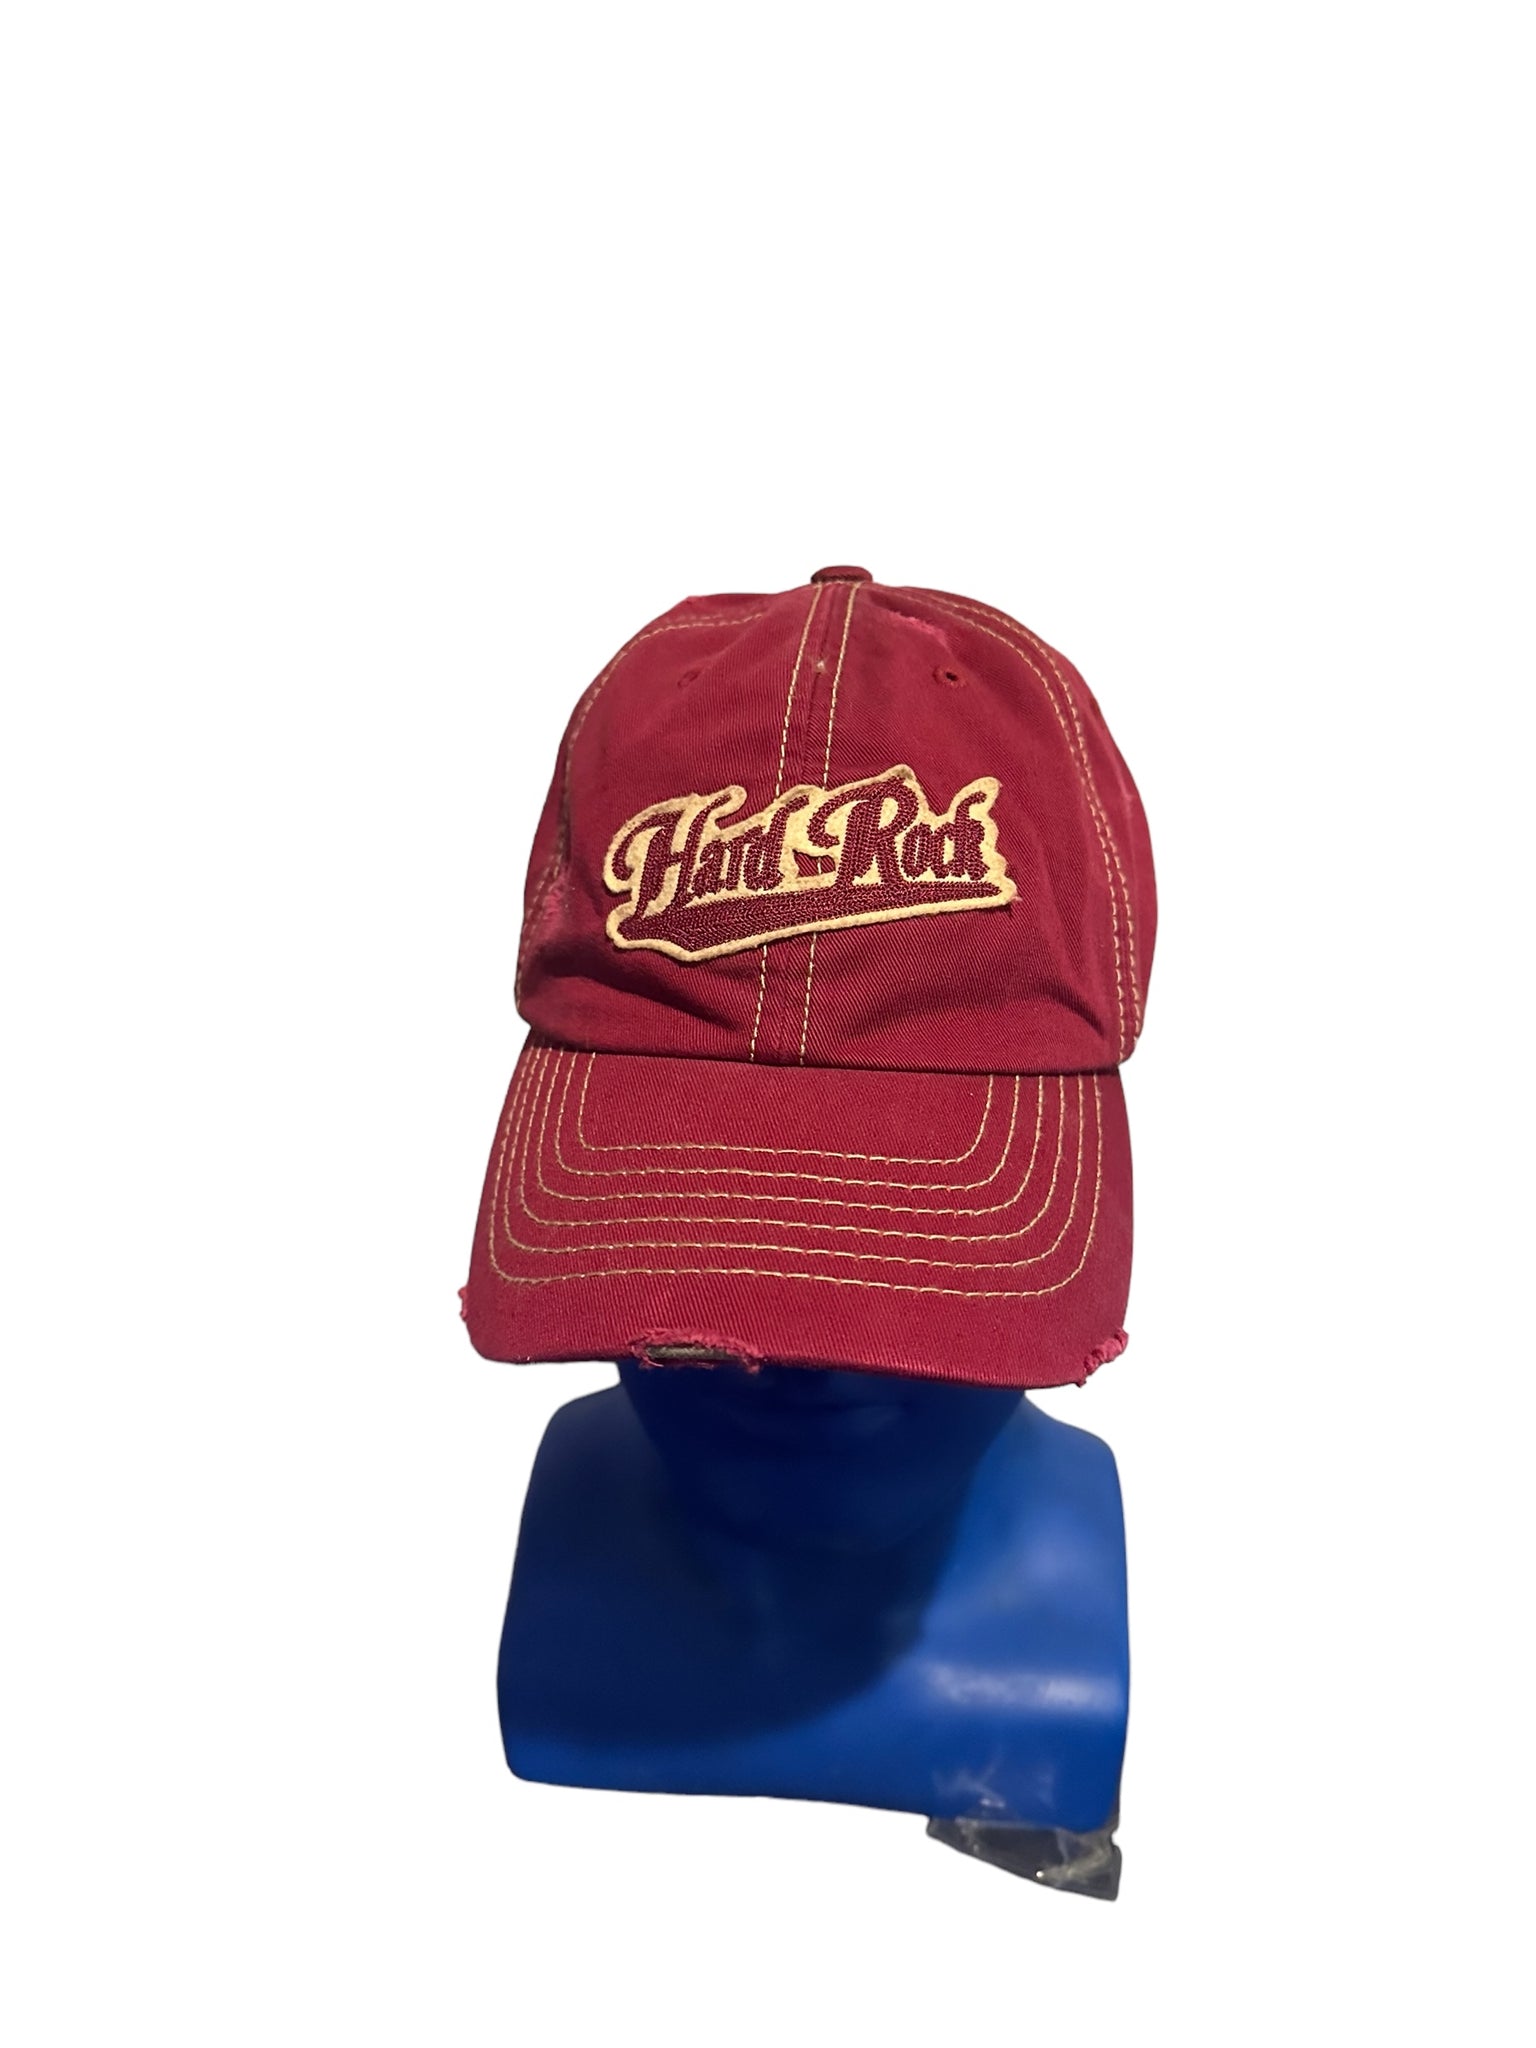 Hard Rock Cafe Baltimore Distressed Style Adjustable Patch Hat Maroon Burgundy